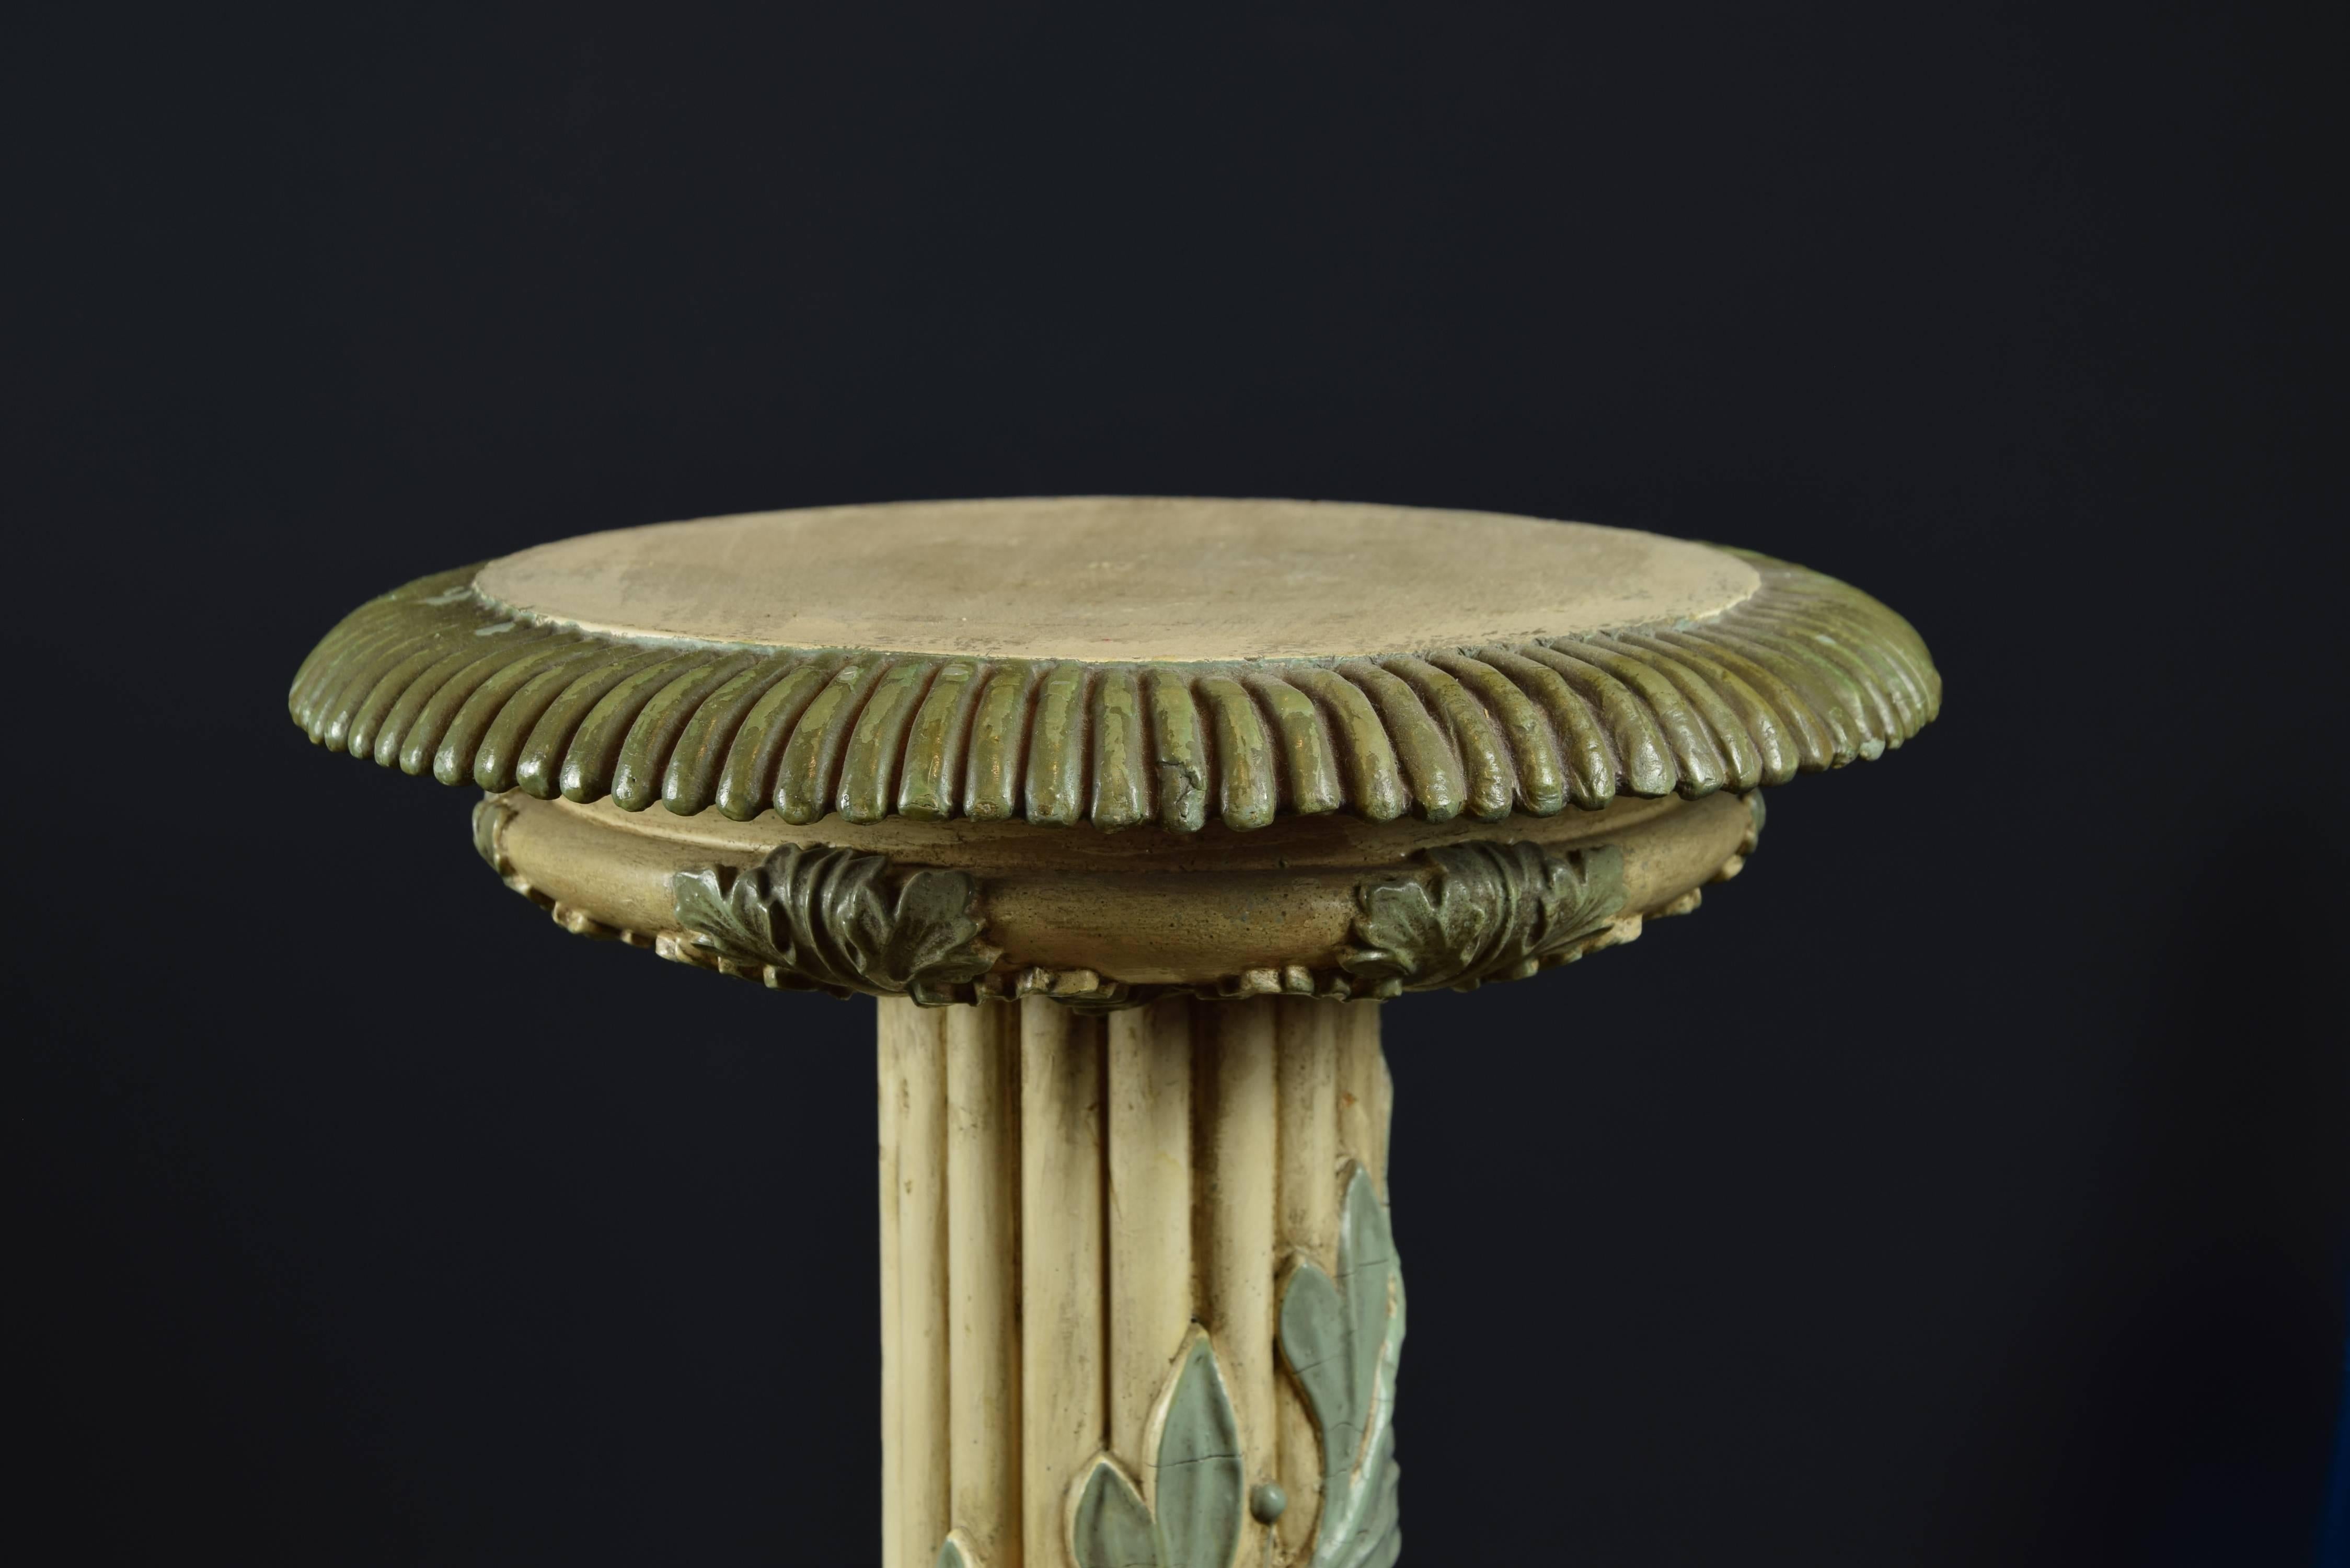 Pair of pedestals formed by a base elevated on lion claws with scrolls and birds, and a grooved shaft that ends in two circular moldings, decorated with plant and architectural elements. Spiral leaf branches have been carved on the shafts of the